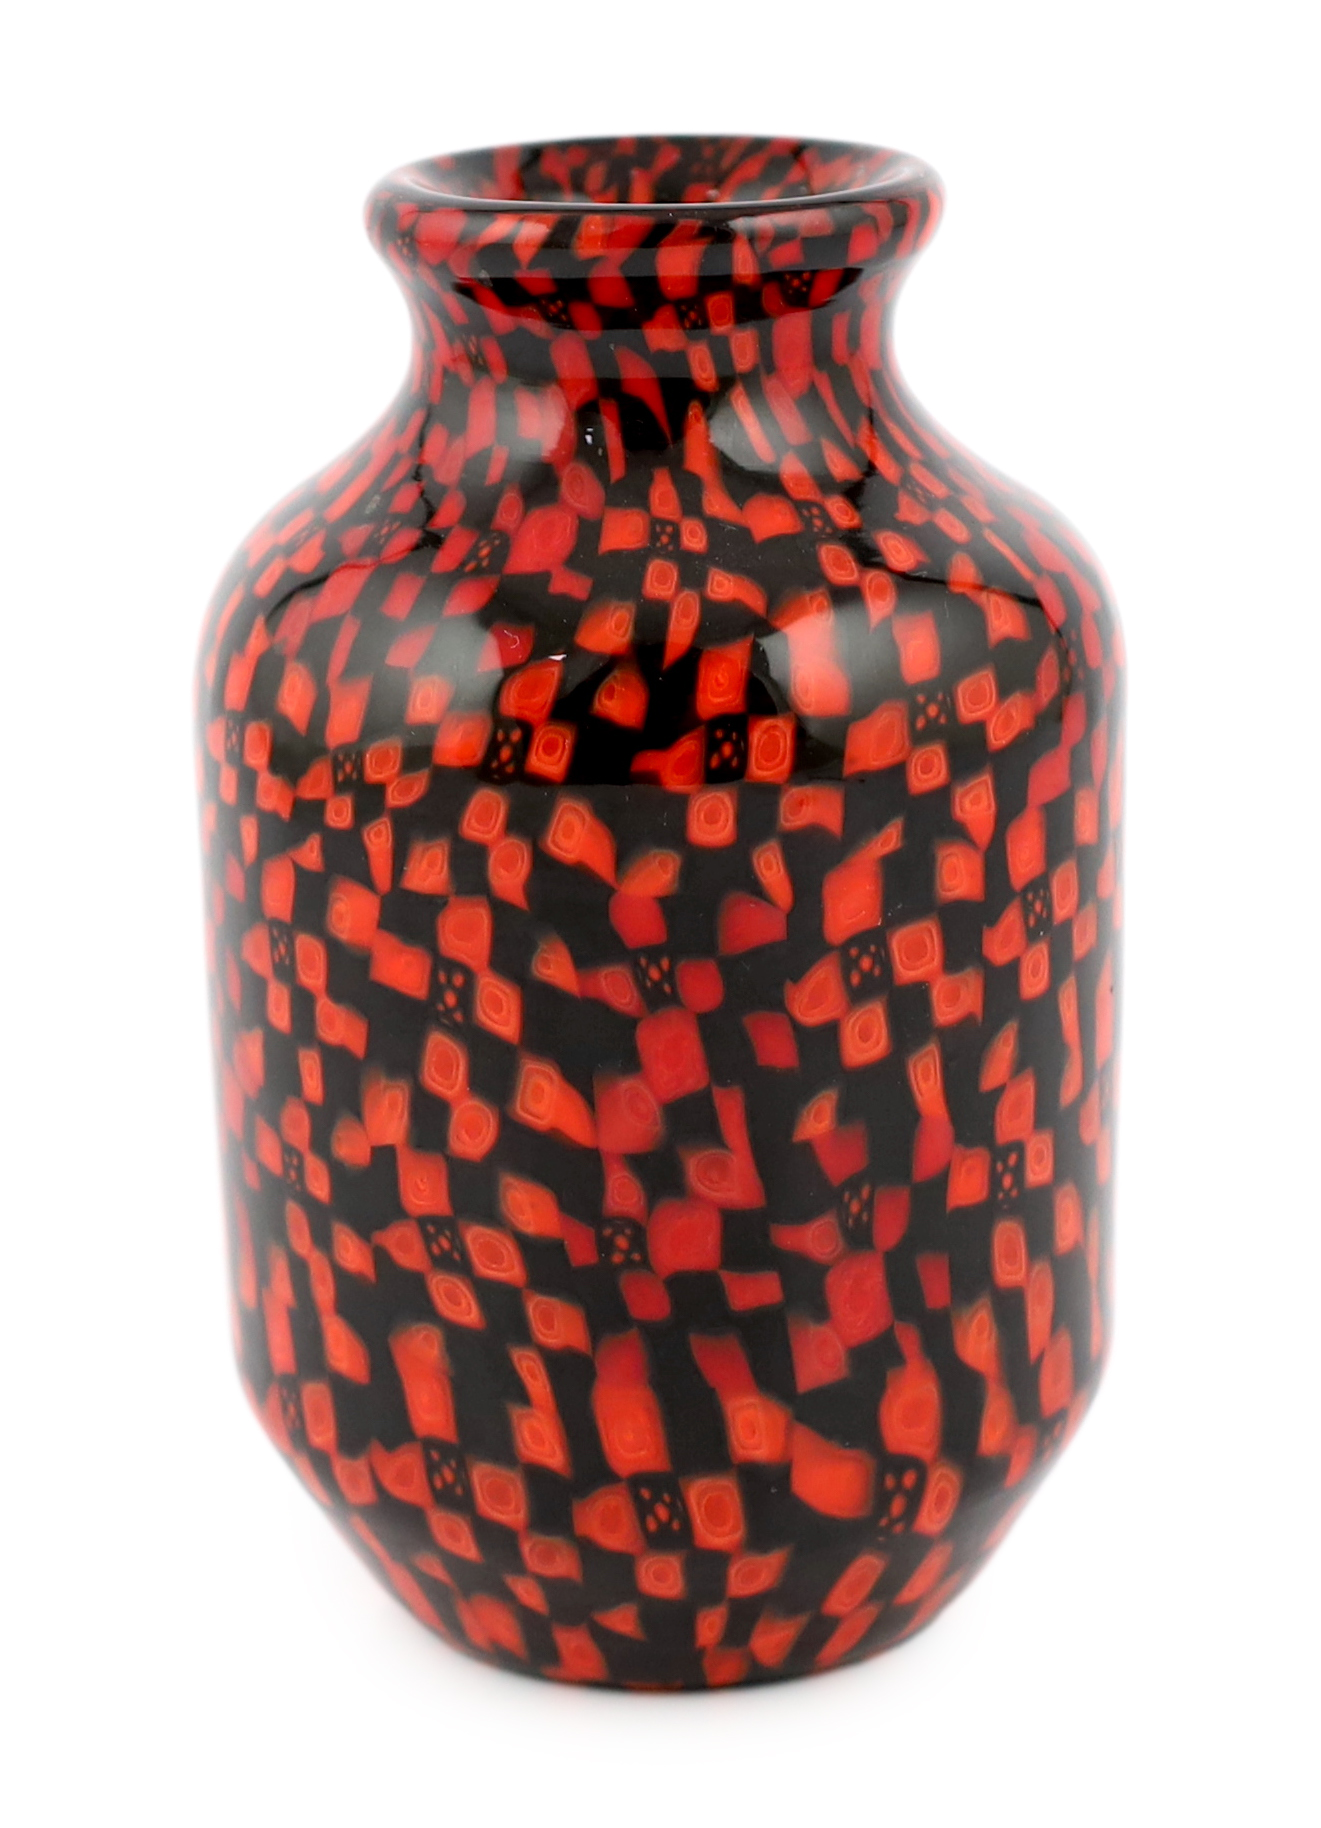 Vittorio Ferro (1932-2012) A Murano glass Murrine vase, in red and black, signed, 19cm, Please note this lot attracts an additional import tax of 20% on the hammer price